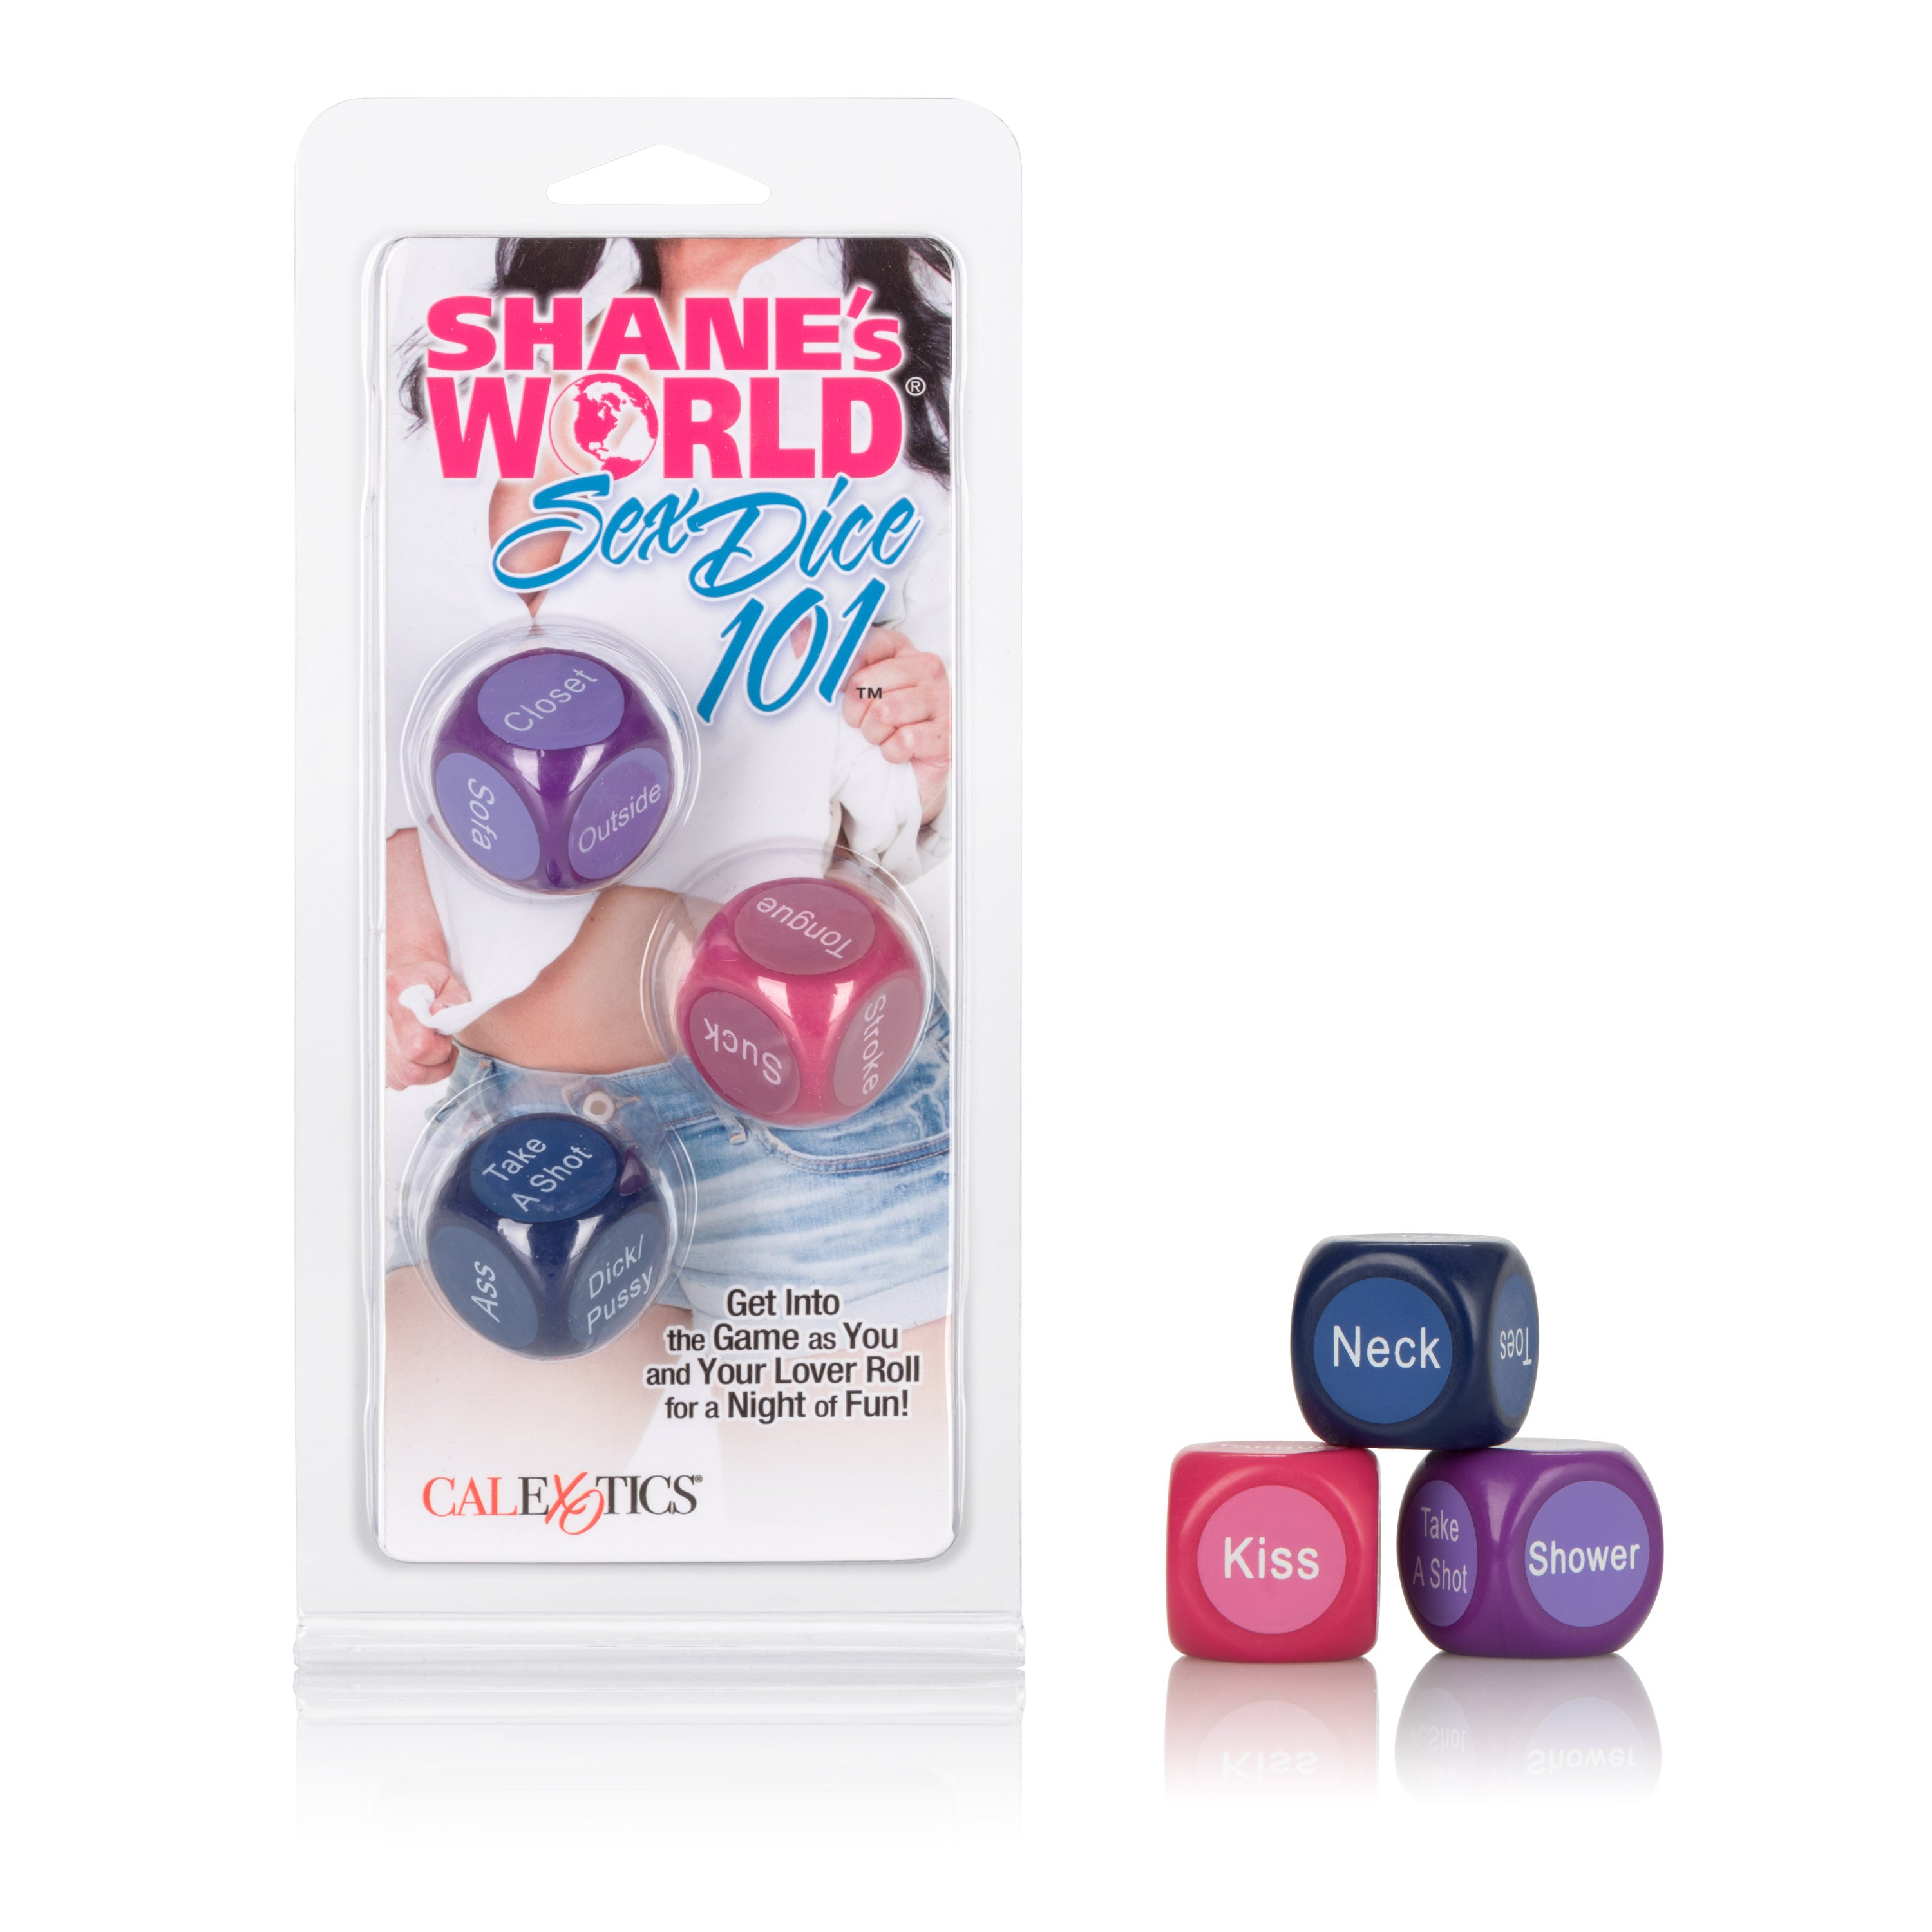 Shane's World Sex Dice 101 - Spice Up Your Night with Naughty Dice Games